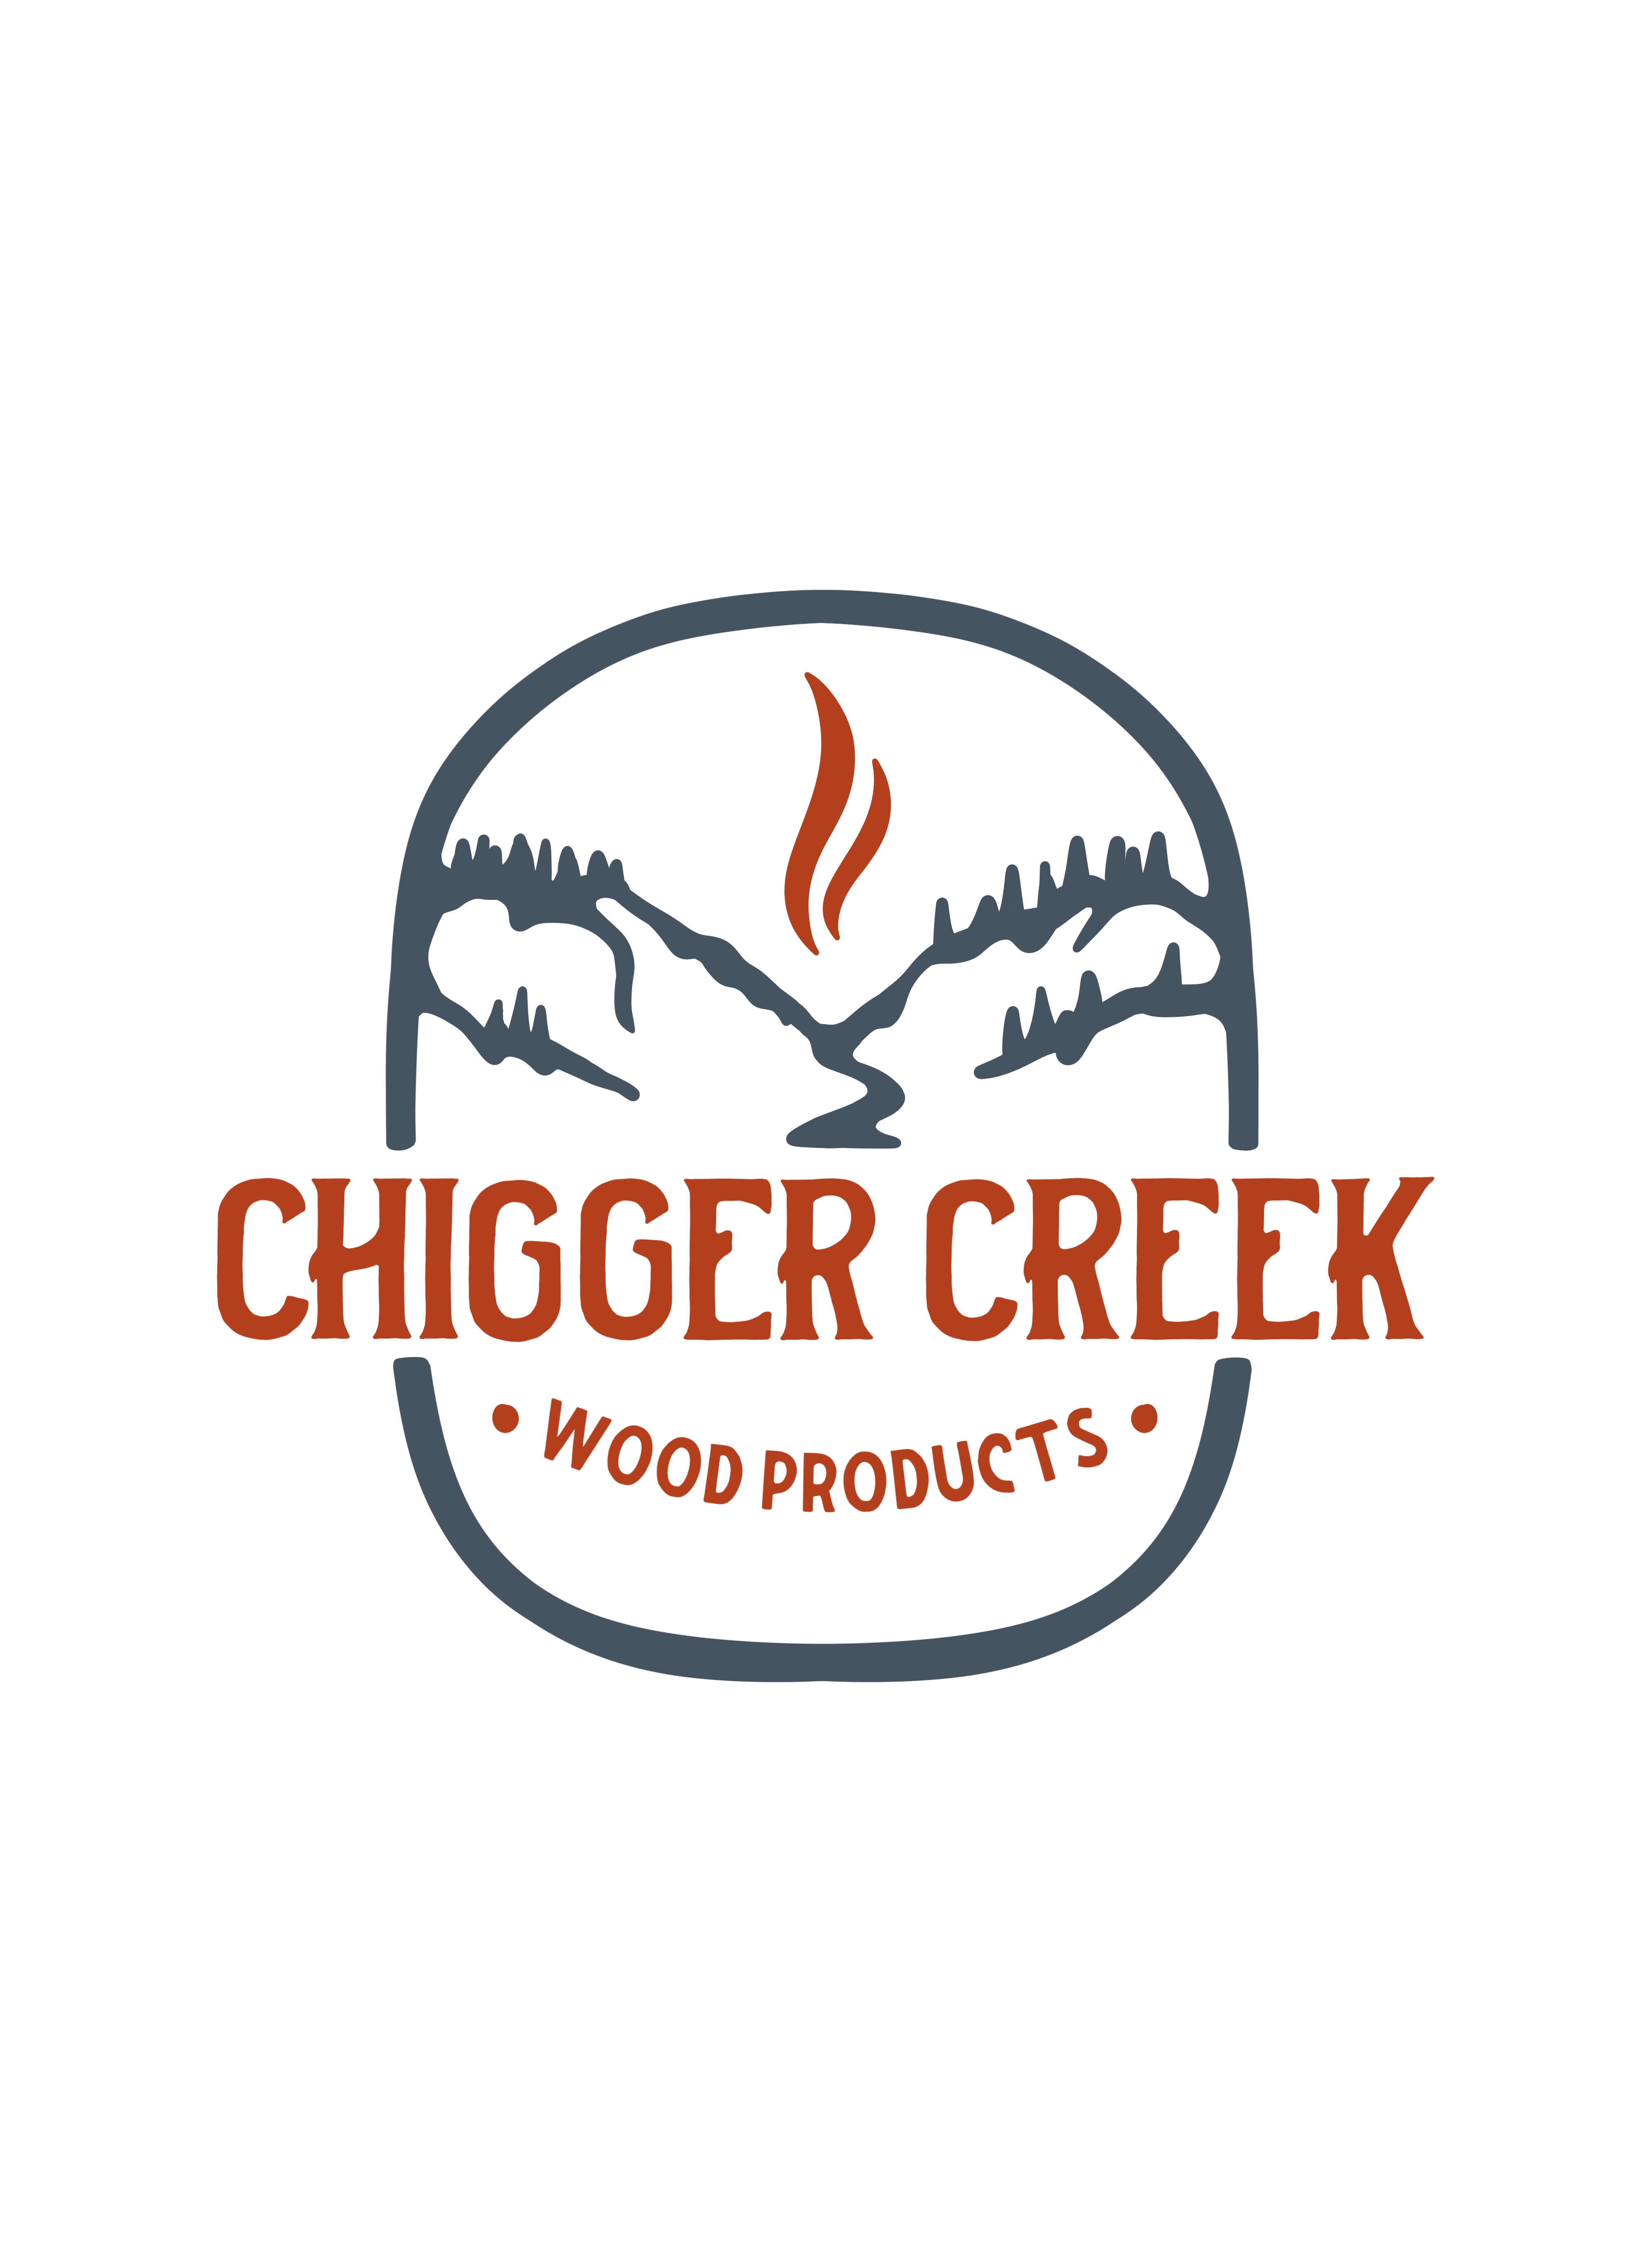 Chips - Chigger Creek Wood Products